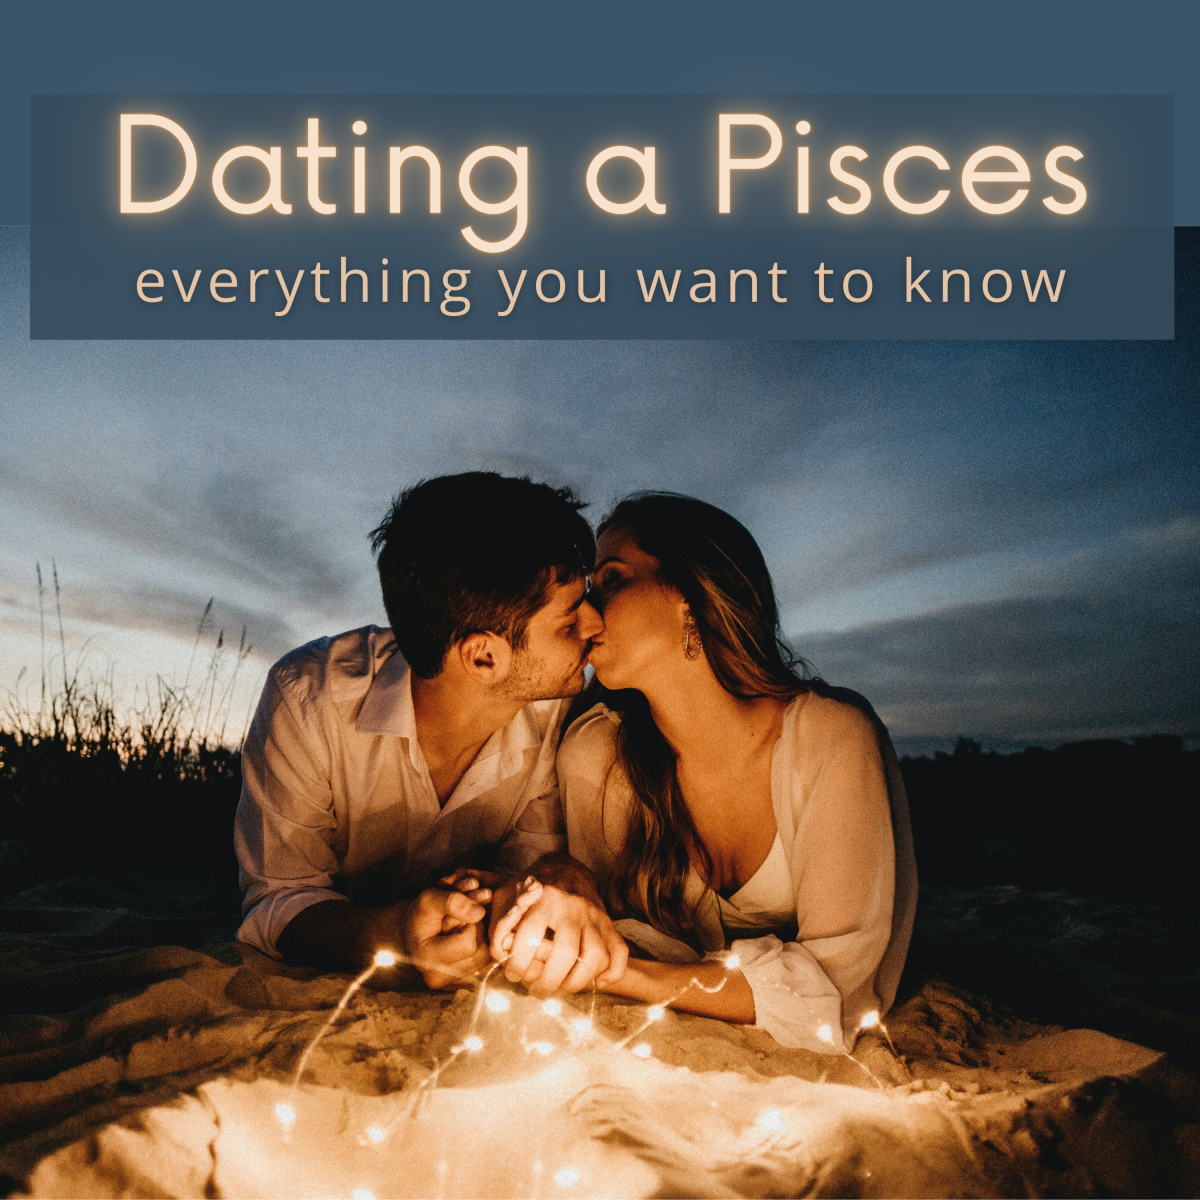 Why is it hard to date a pisces man?